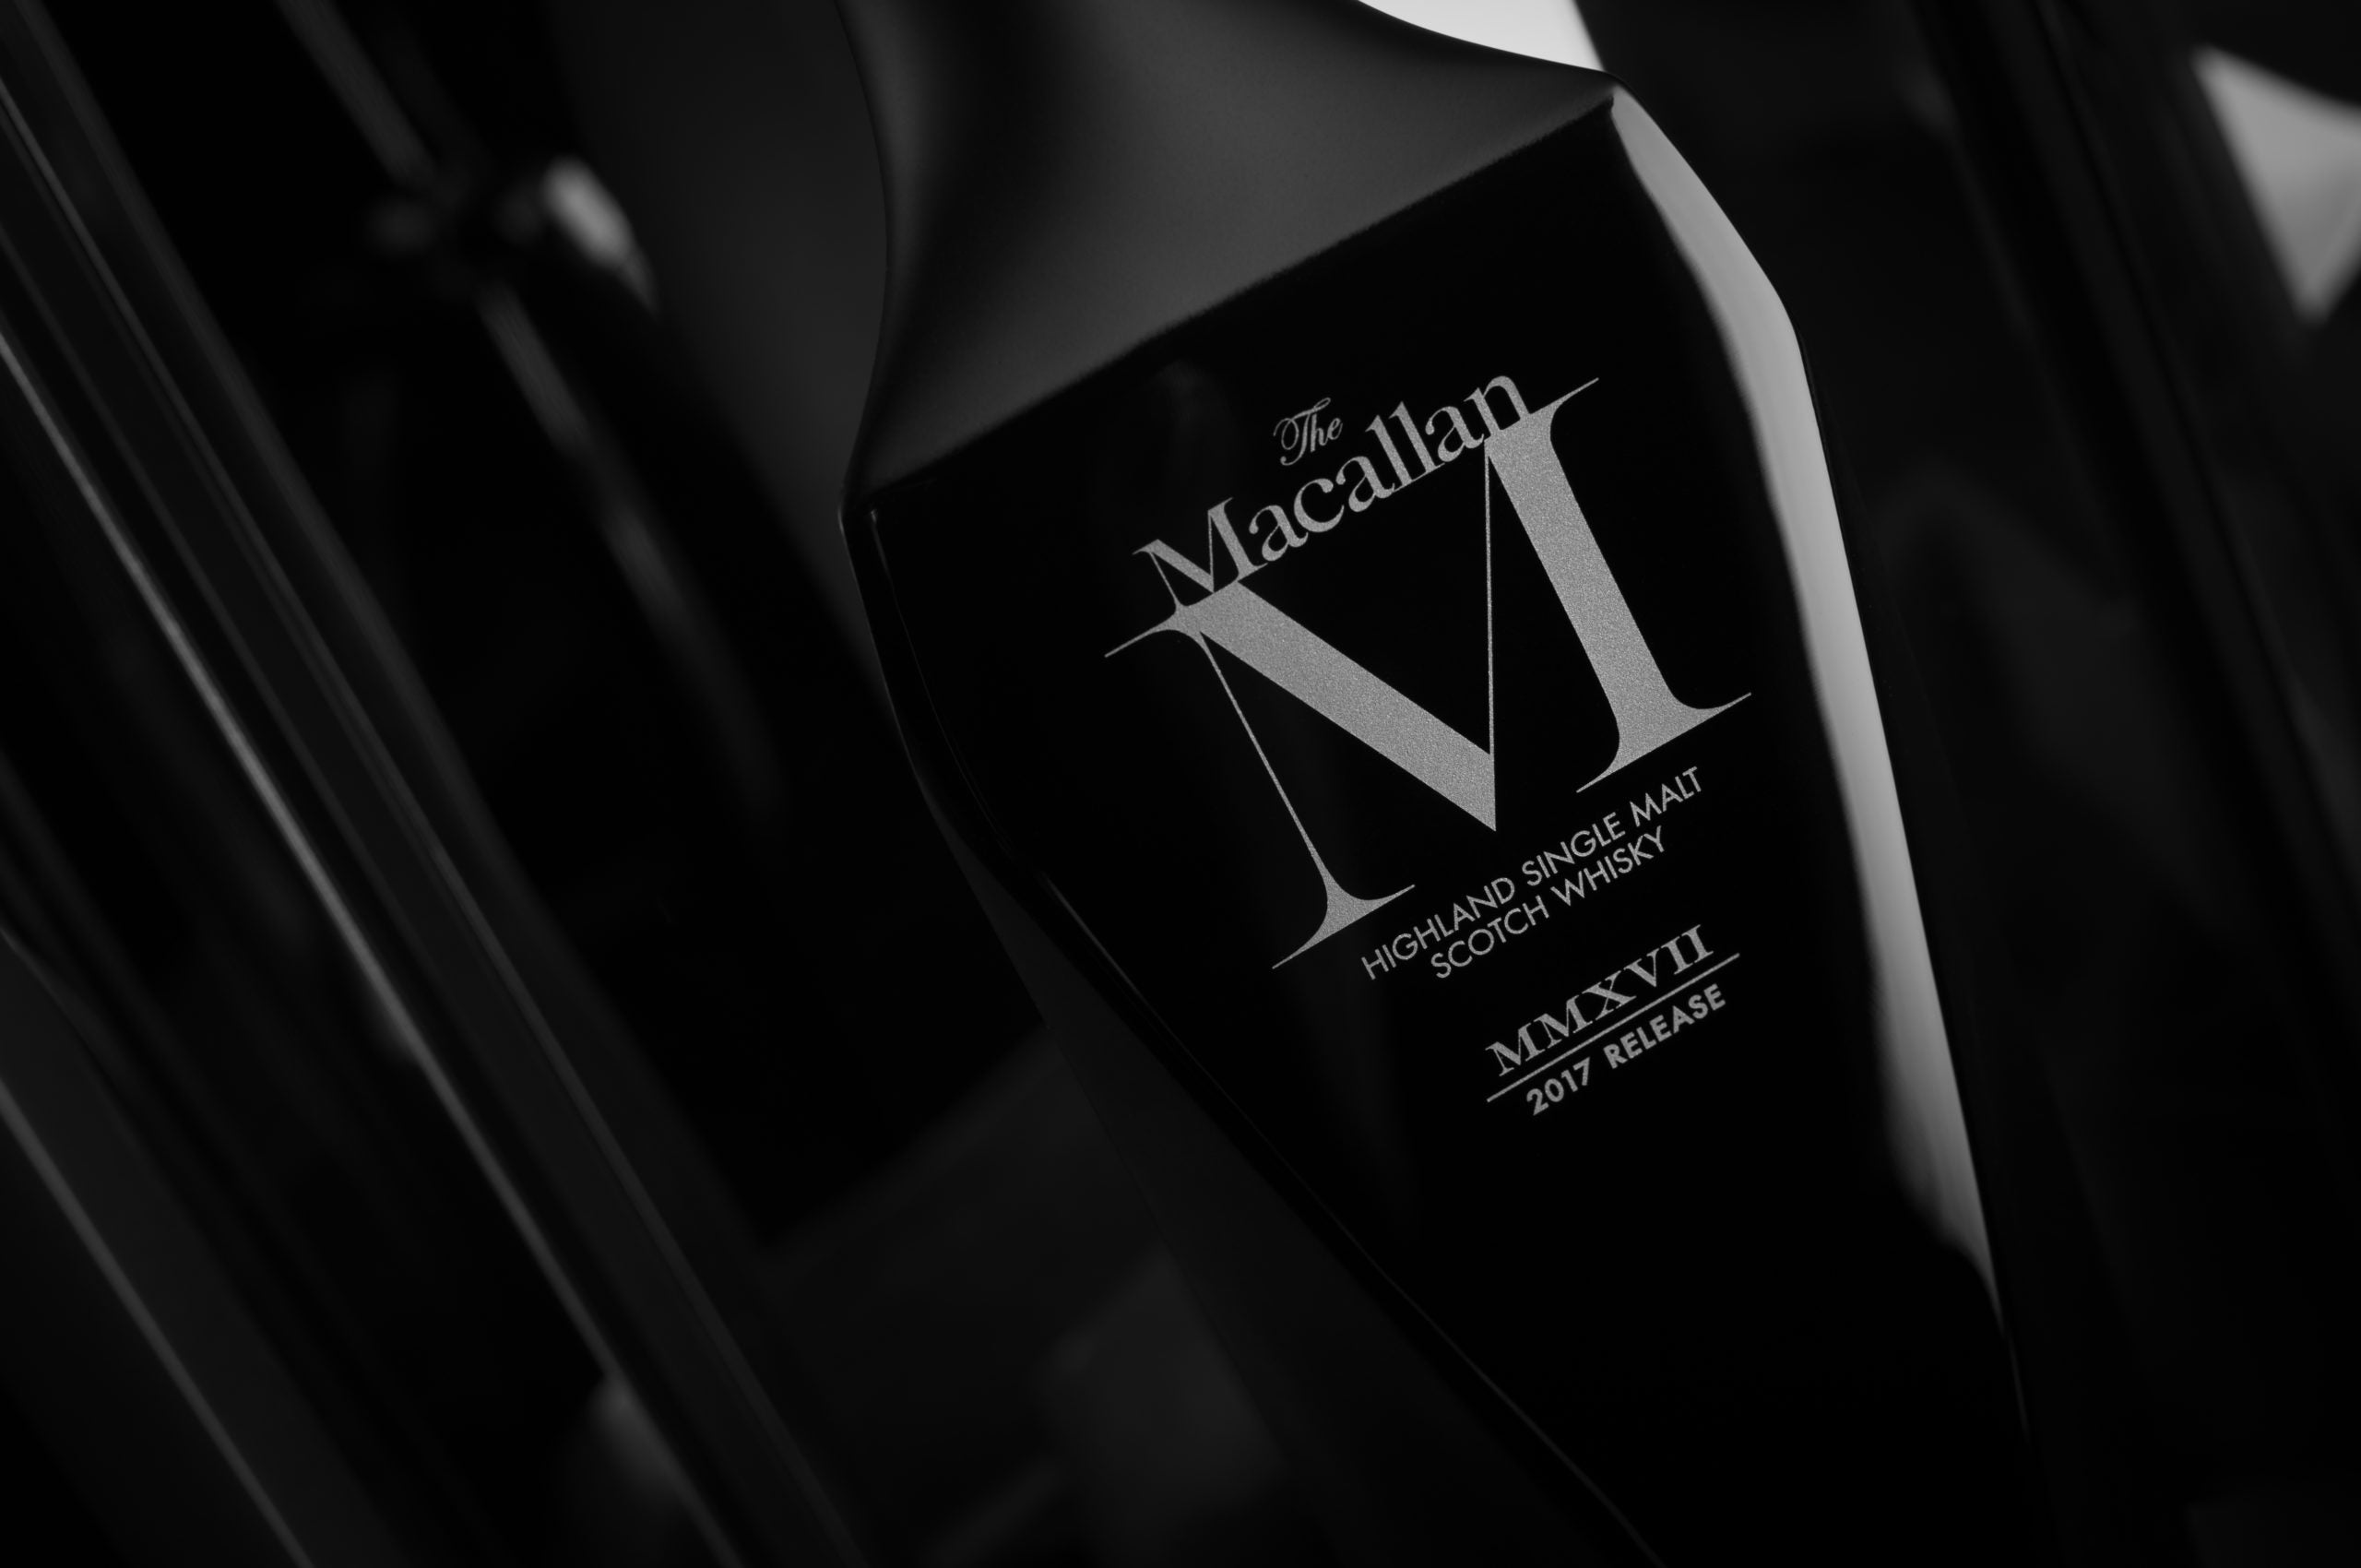 The Macallan releases limited edition M Black